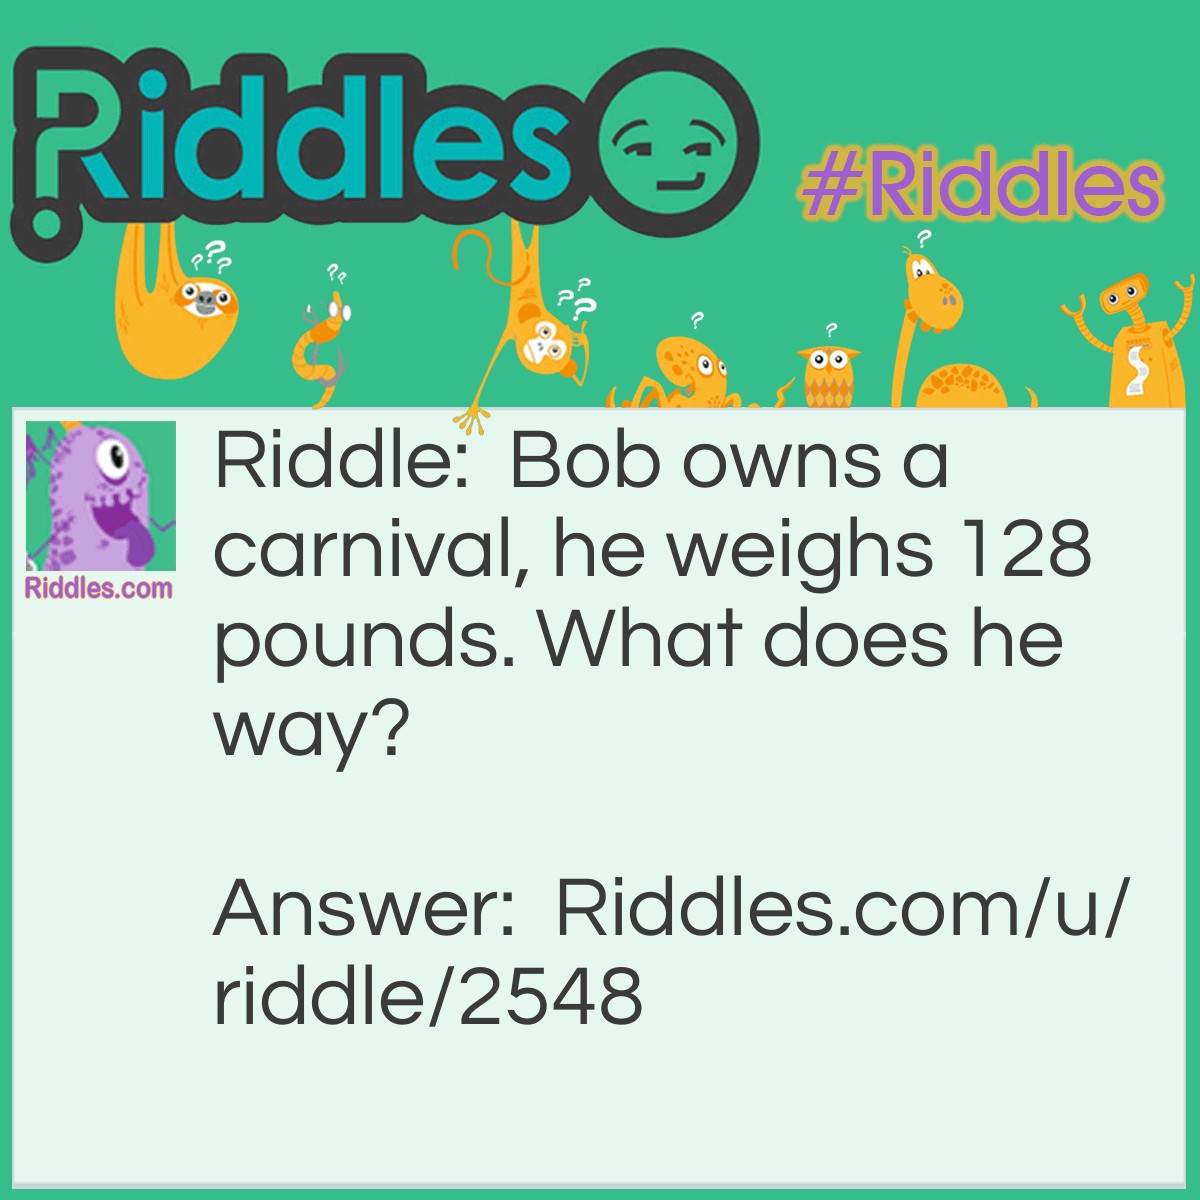 Riddle: Bob owns a carnival, he weighs 128 pounds. What does he way? Answer: Children. (He is a cheater in a guess the weight contest).